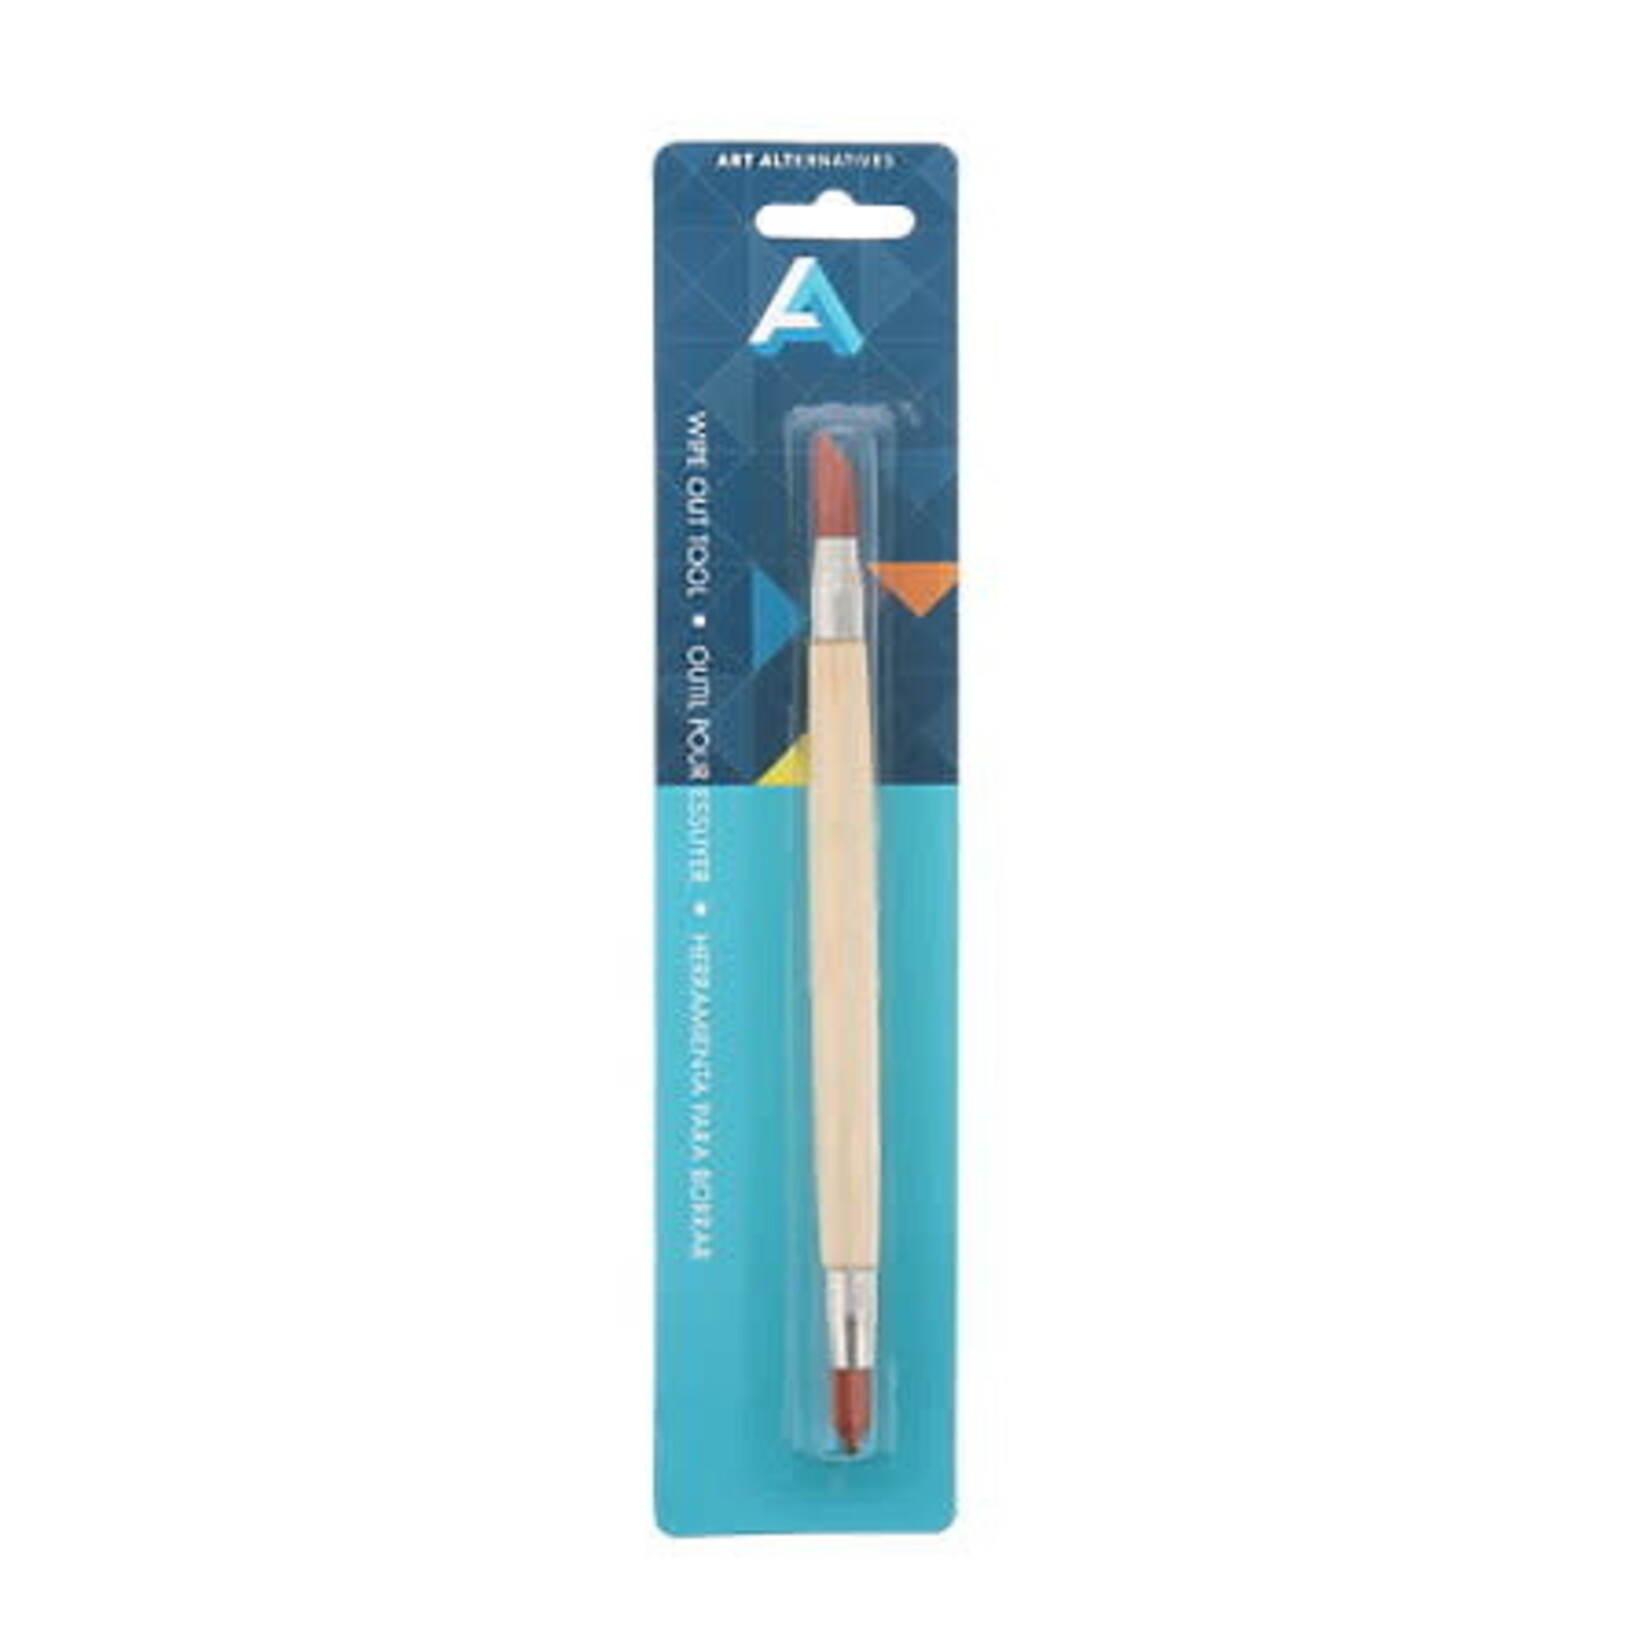 Art Alternatives Wipe Out Tool, Double Ended, Rubber tipped Tool